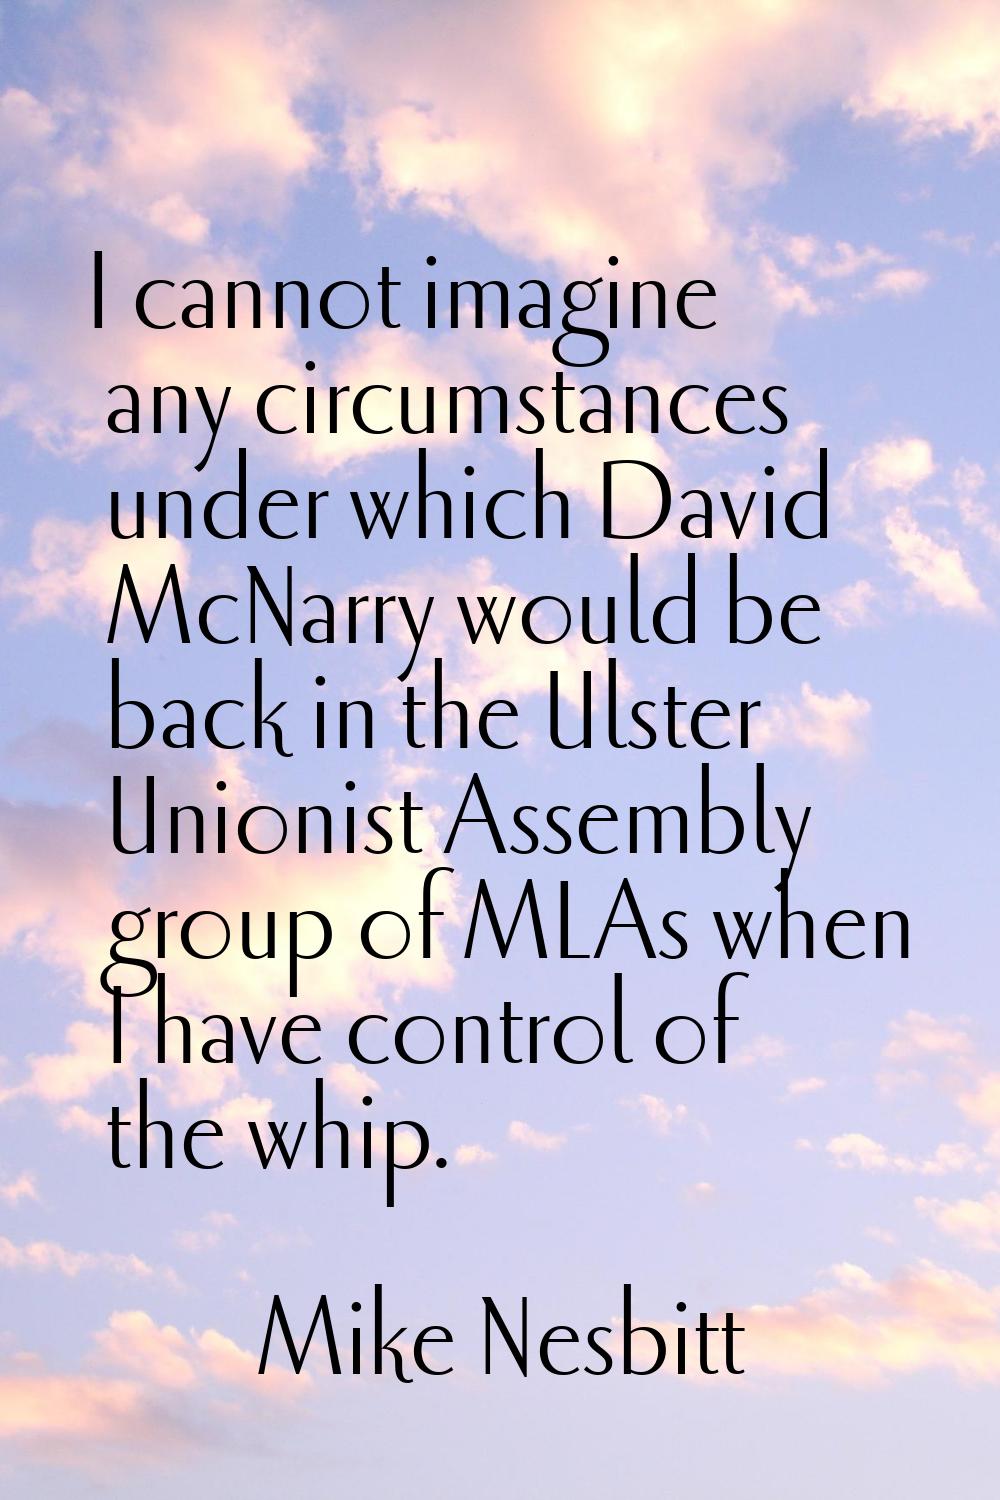 I cannot imagine any circumstances under which David McNarry would be back in the Ulster Unionist A